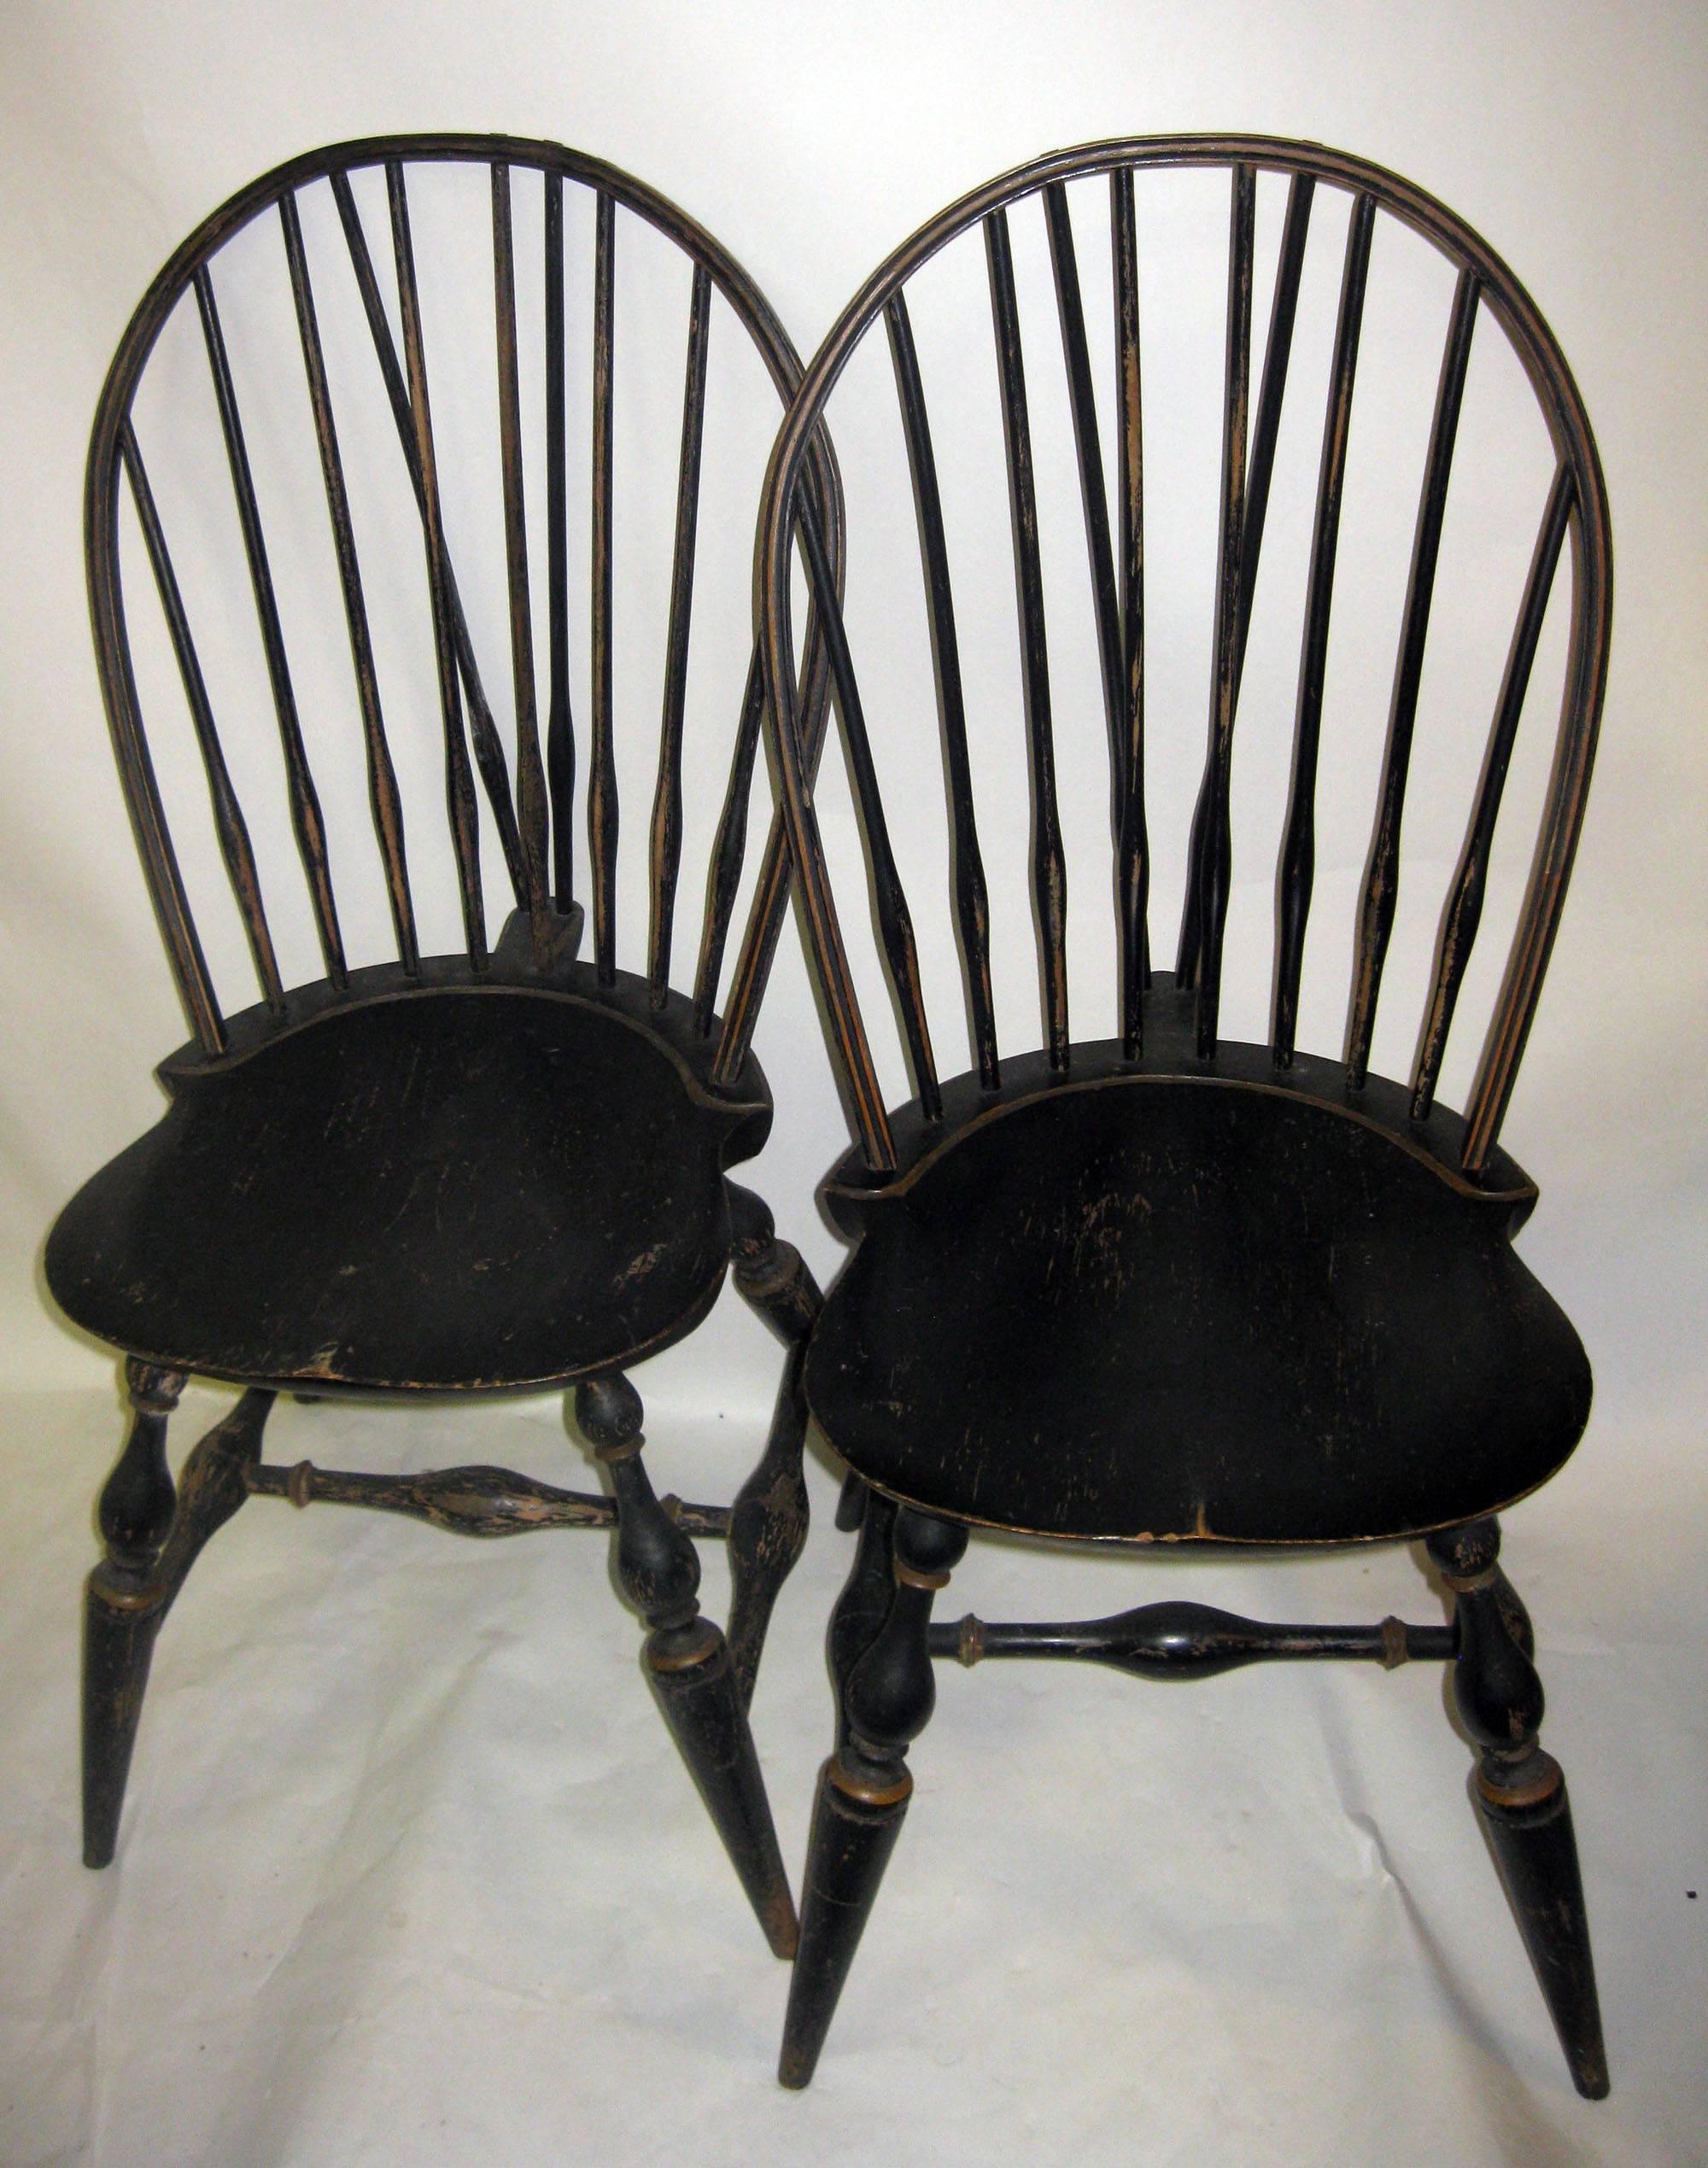 Eight bow backed American Windsor chairs with spindles braced by tail piece support. Distressed original painted surface with slight gold embellishment. These are typically made of multiple woods, in this case oak, maple and pine.